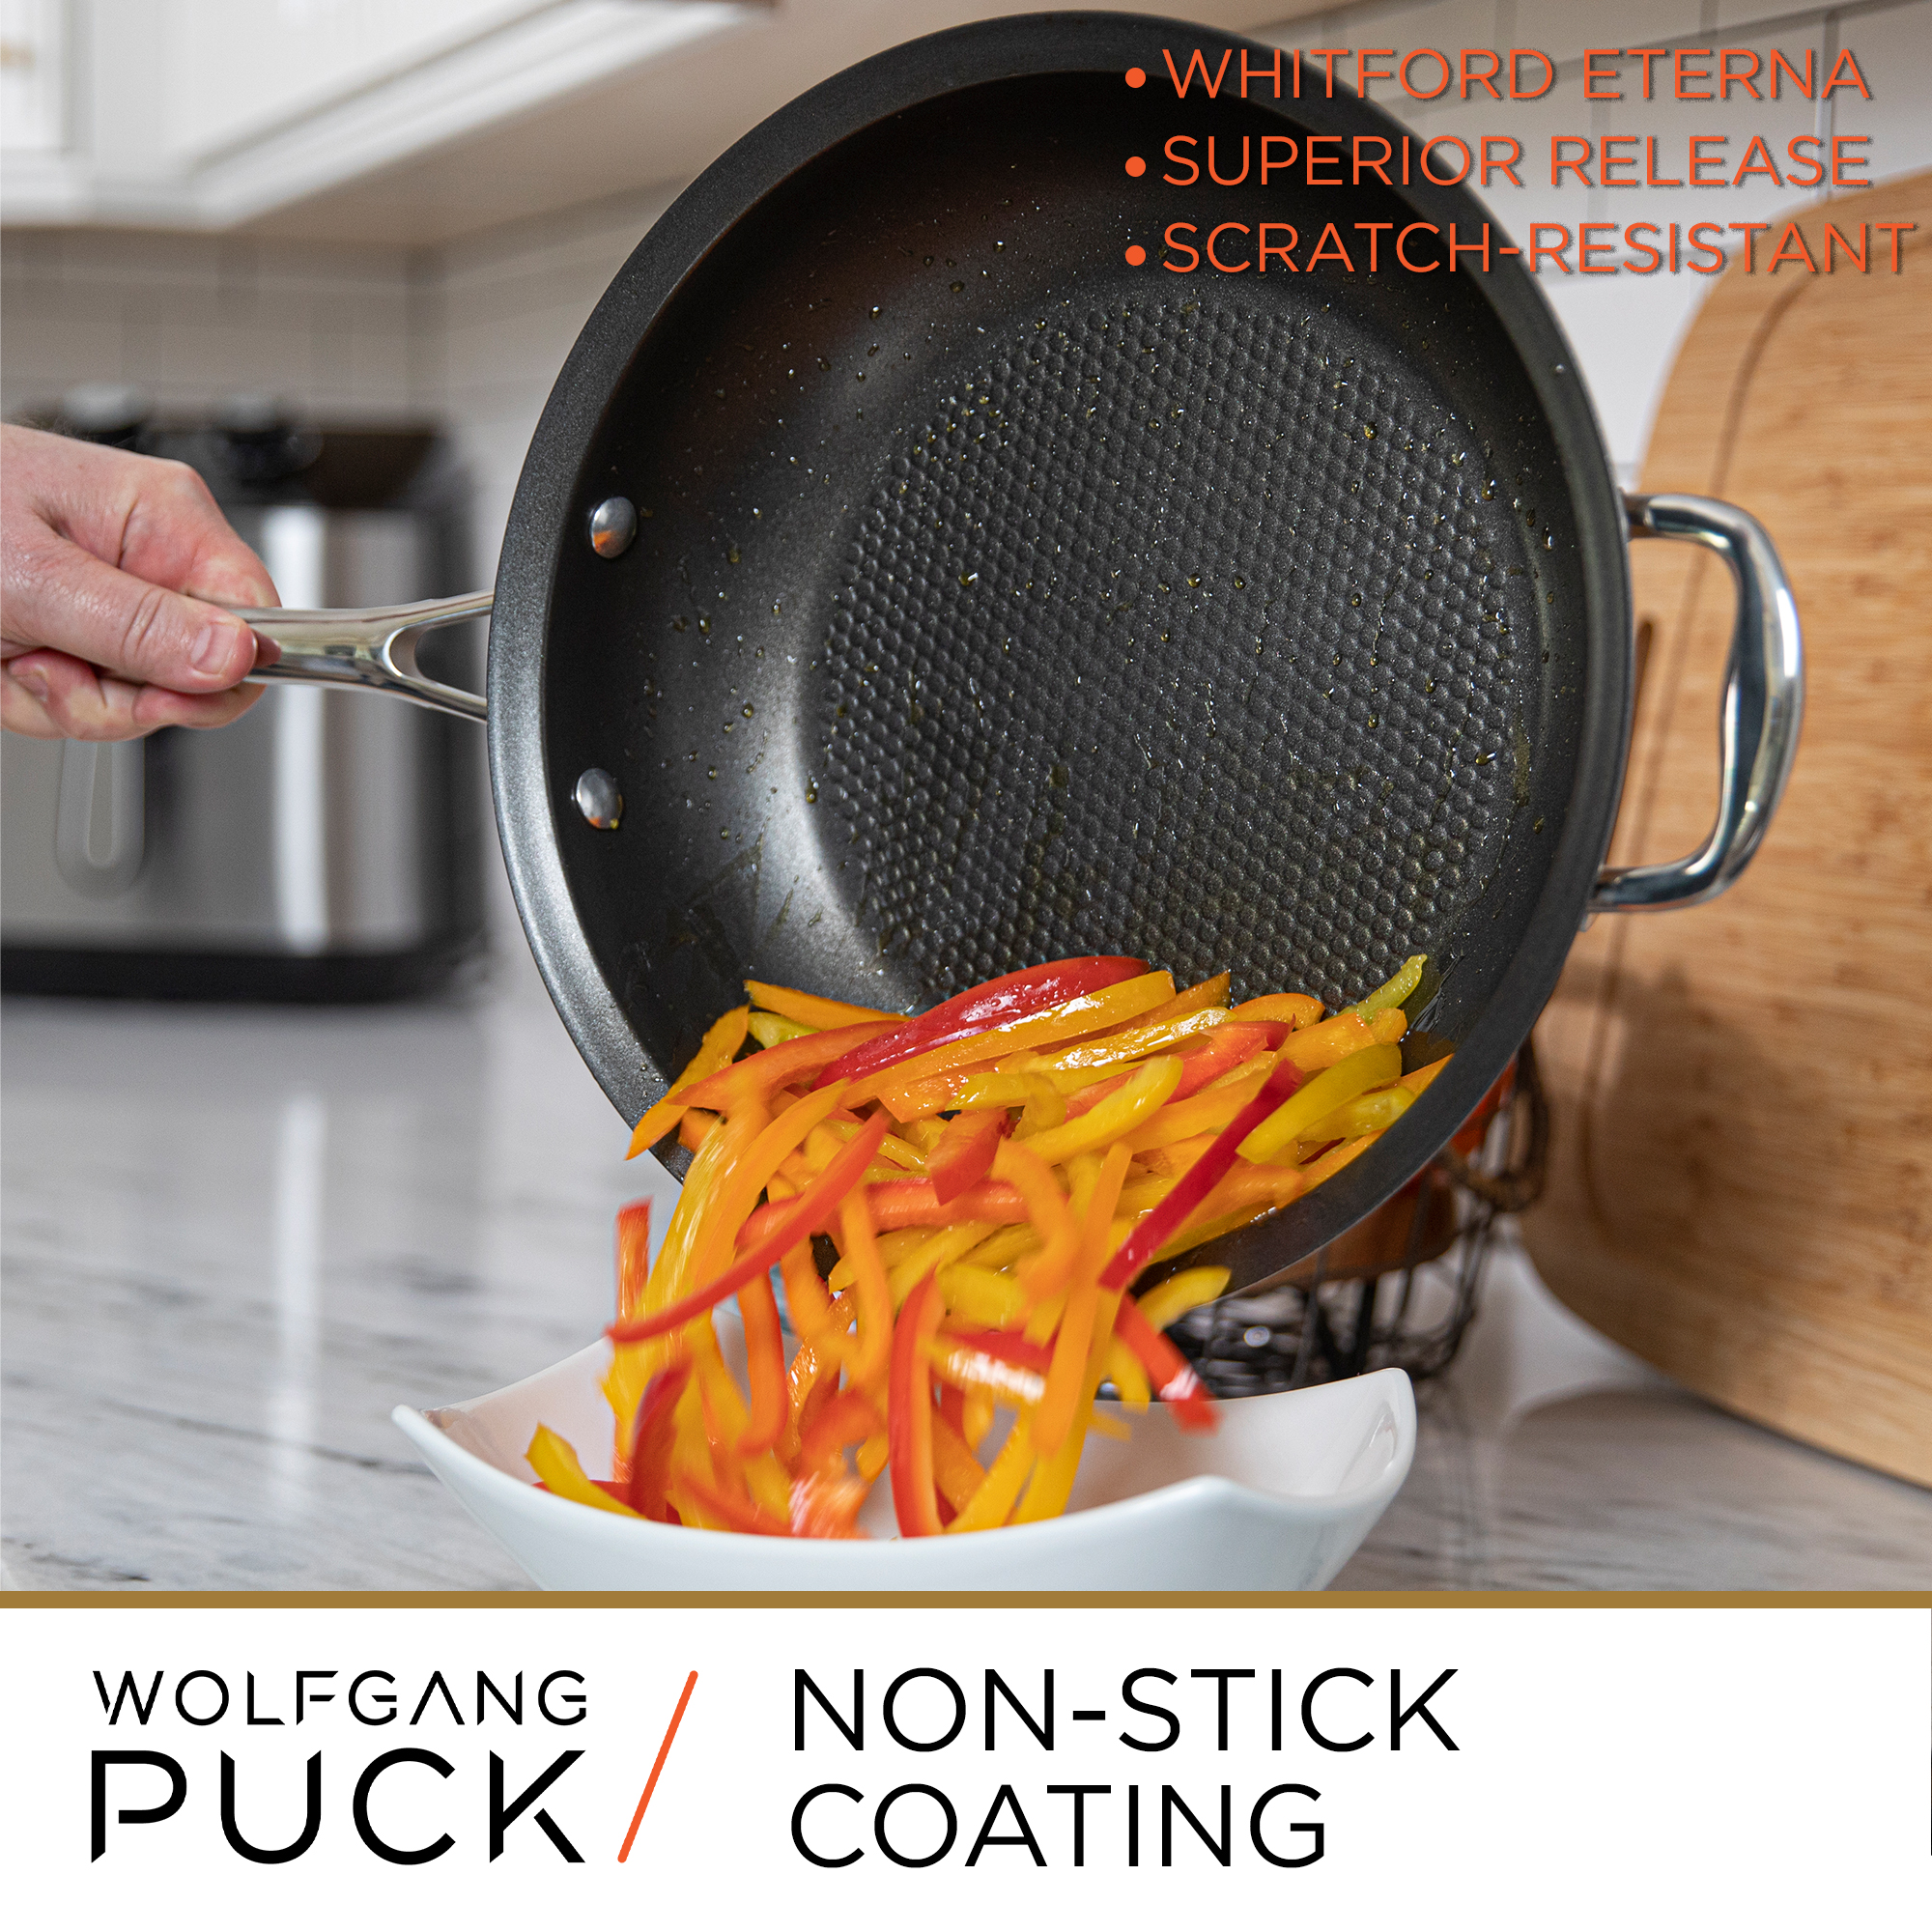 Wolfgang Puck 11 Stainless Steel Sauteuse Pan and Roasting Rack